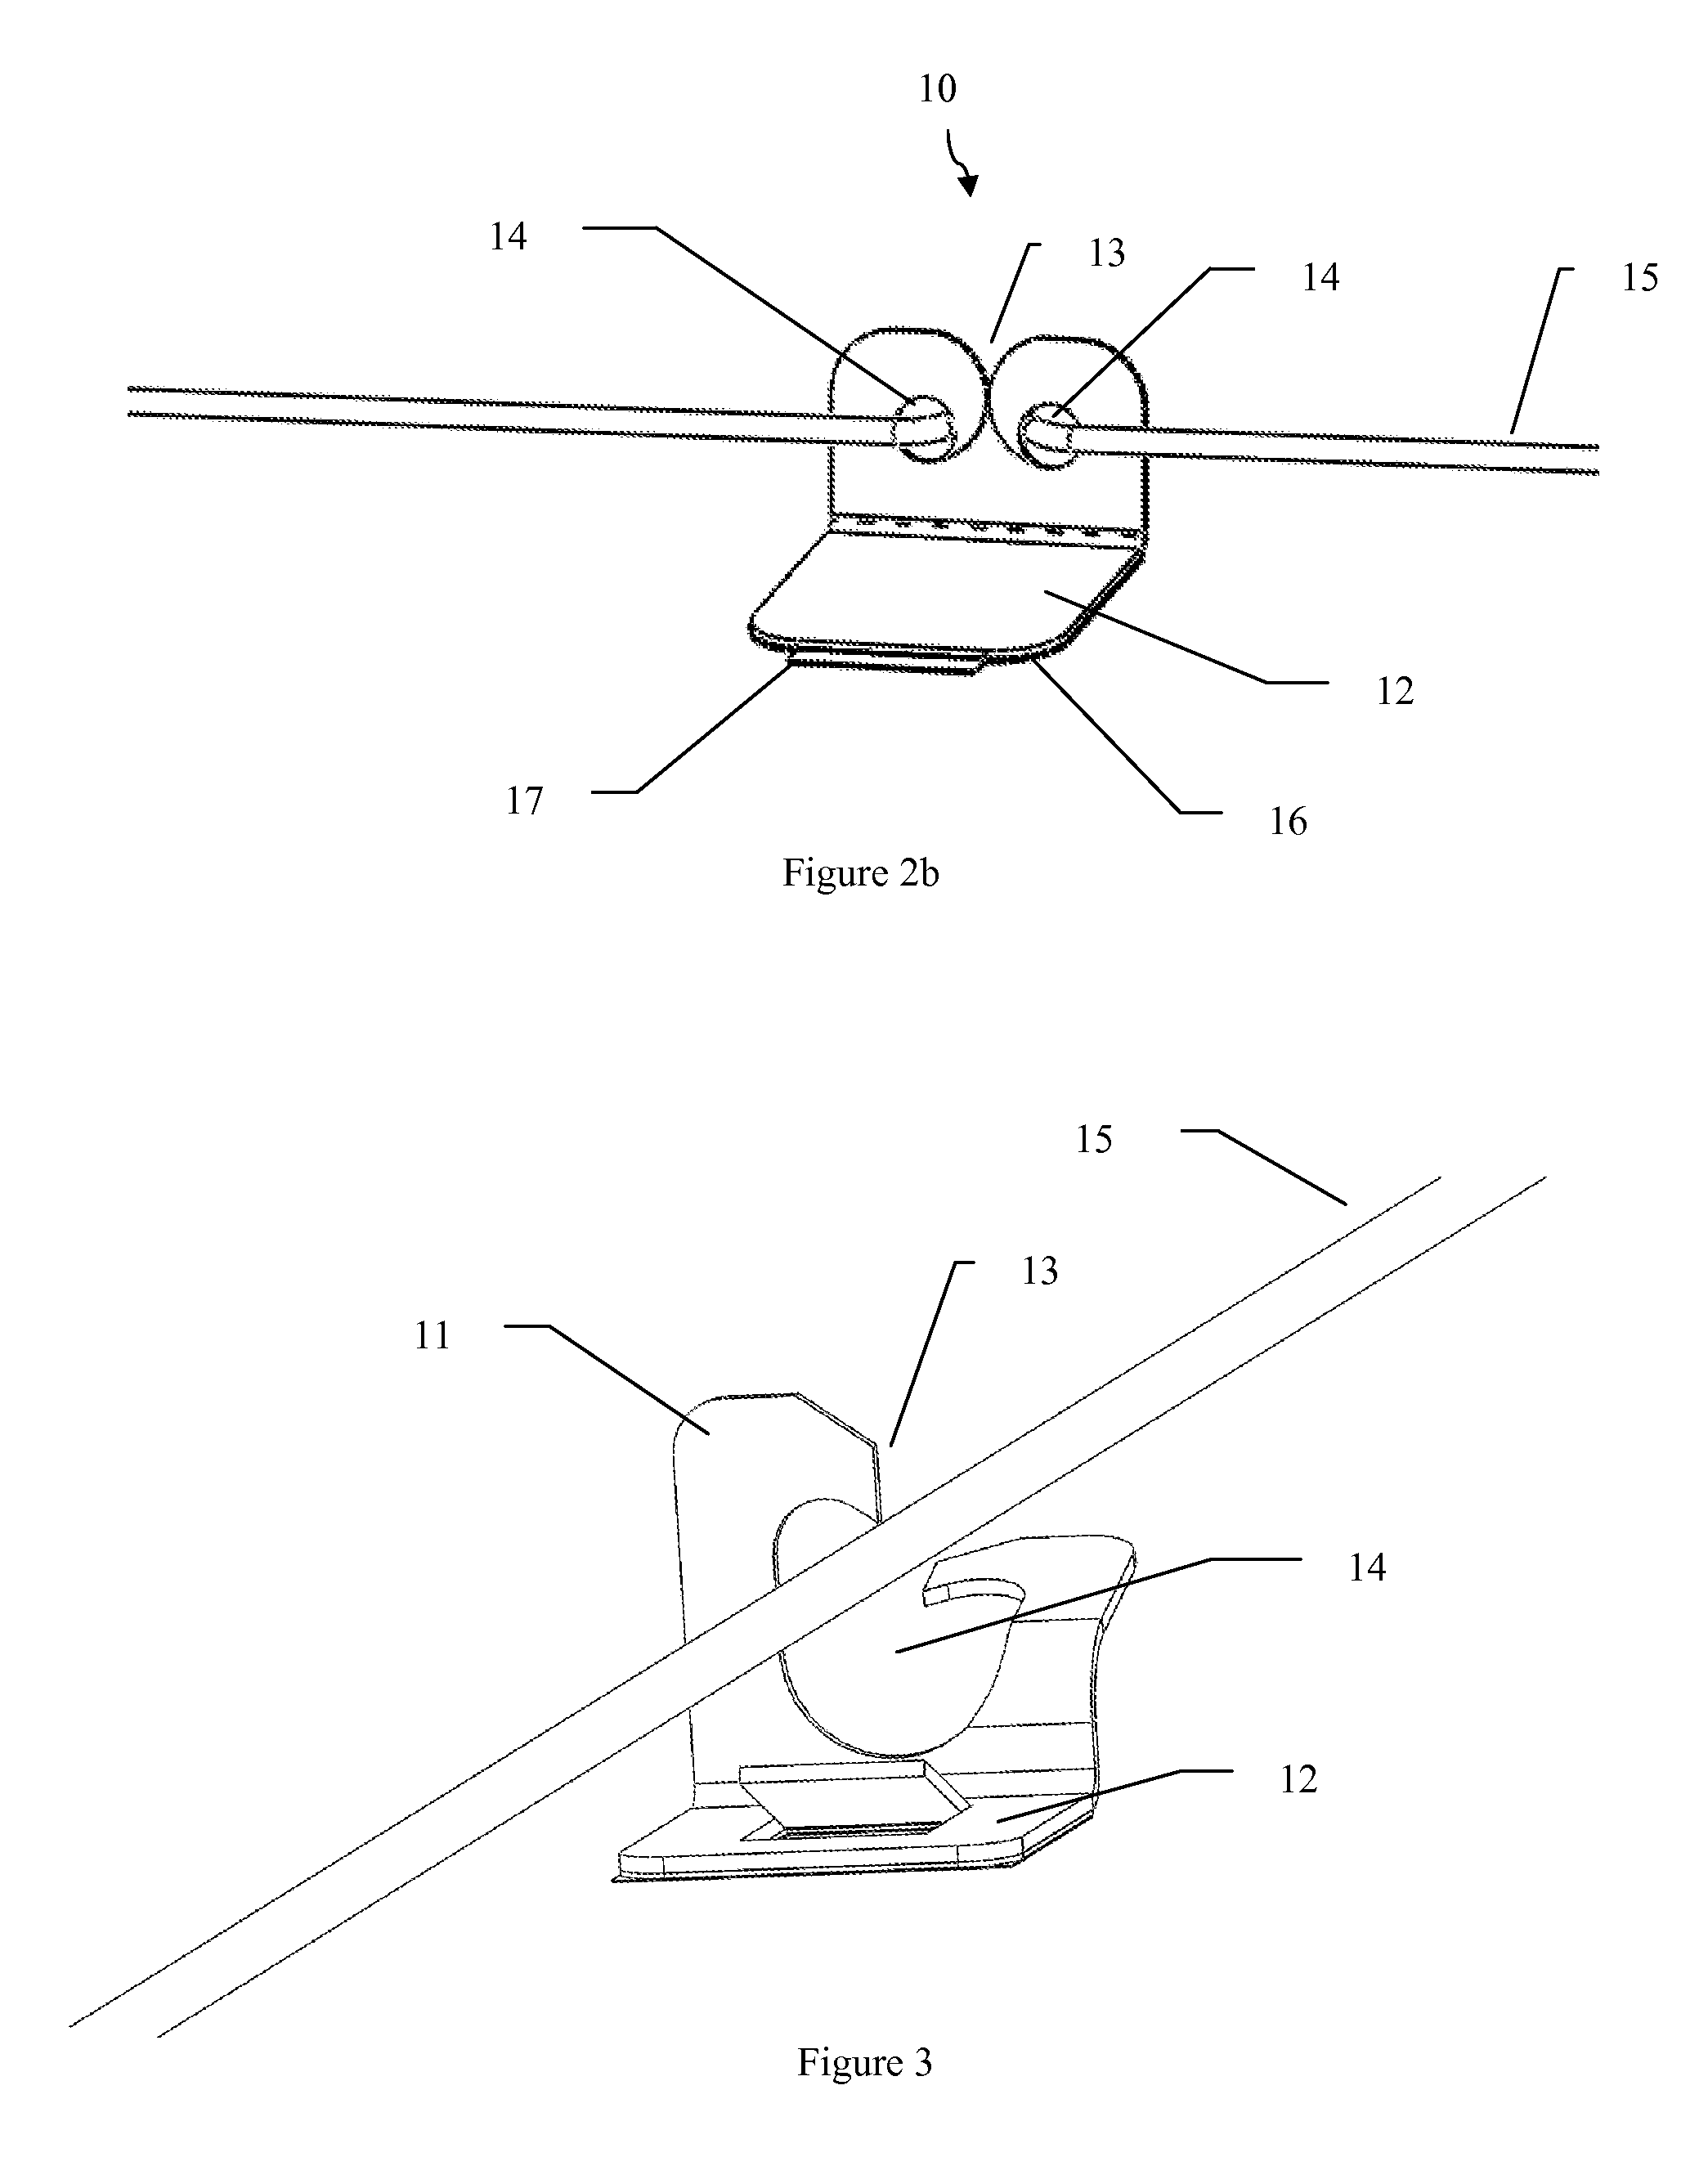 Retaining Device and Method of Using the Same